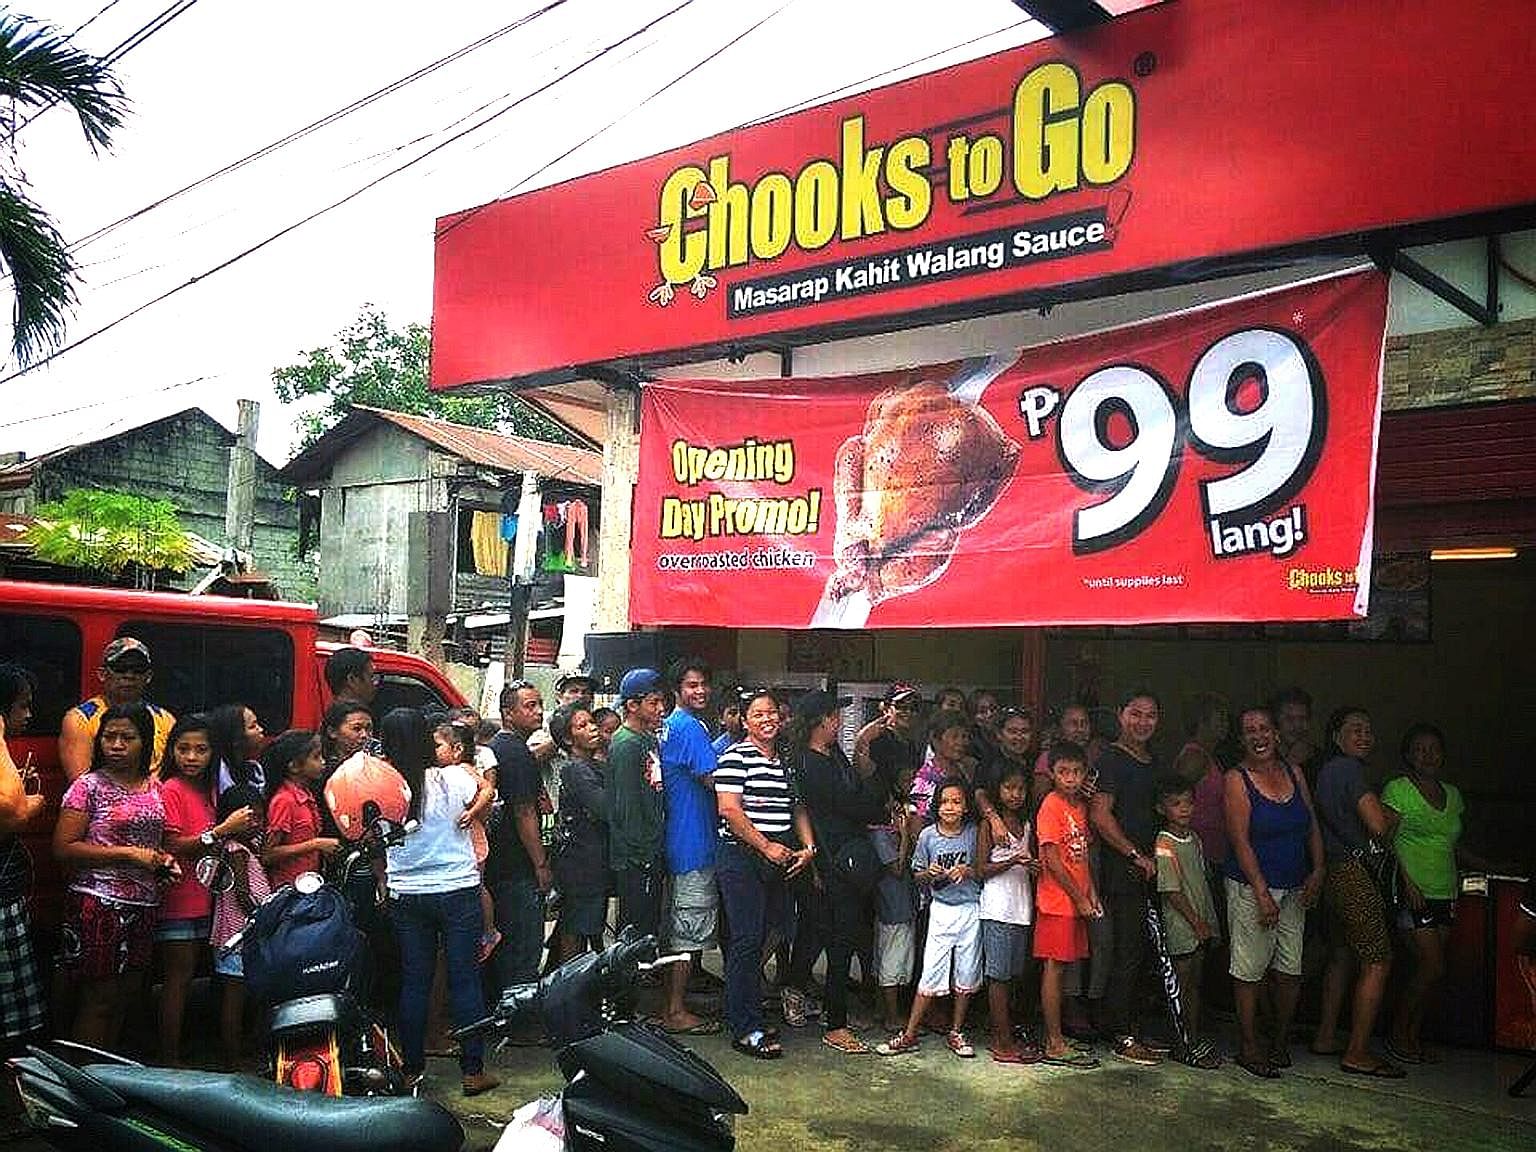 Long queues at a Chooks To Go outlet outside Manila. The Philippines' largest rotisserie chicken chain has over 1,500 kiosks across the country, and its popularity has been a symbol of high consumer demand.